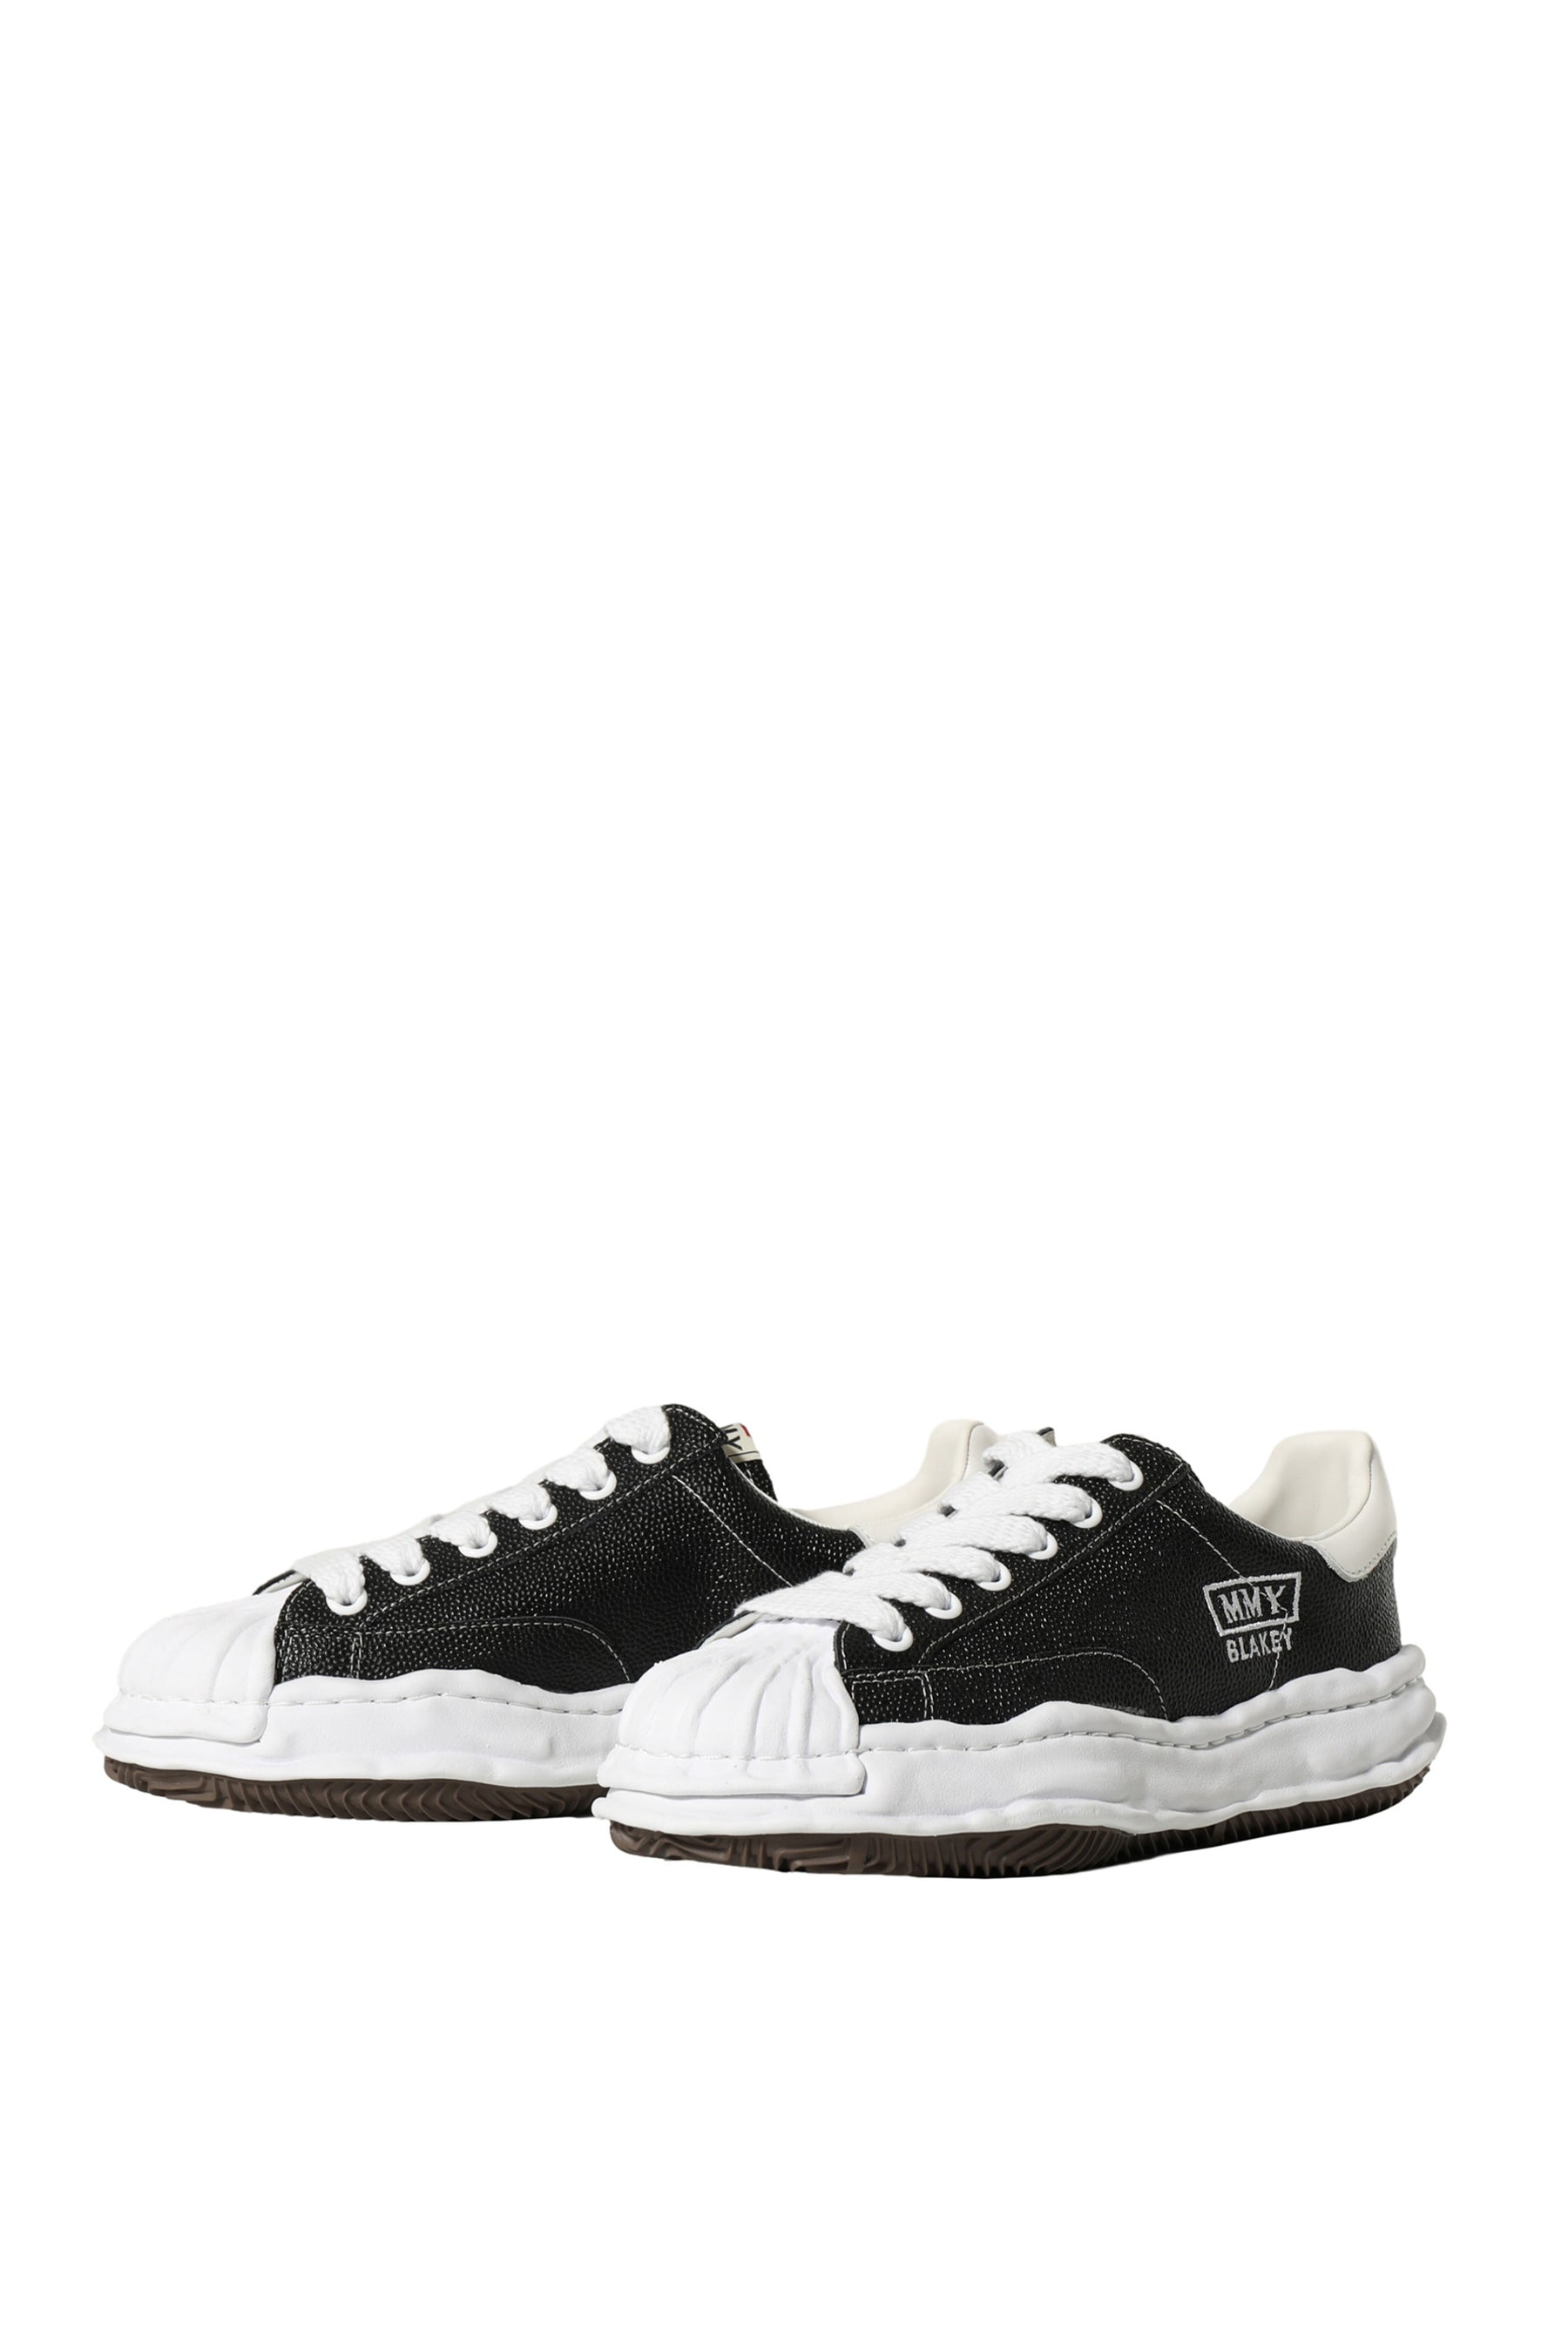 BLKY LOW BSKT LEATHER / BLK